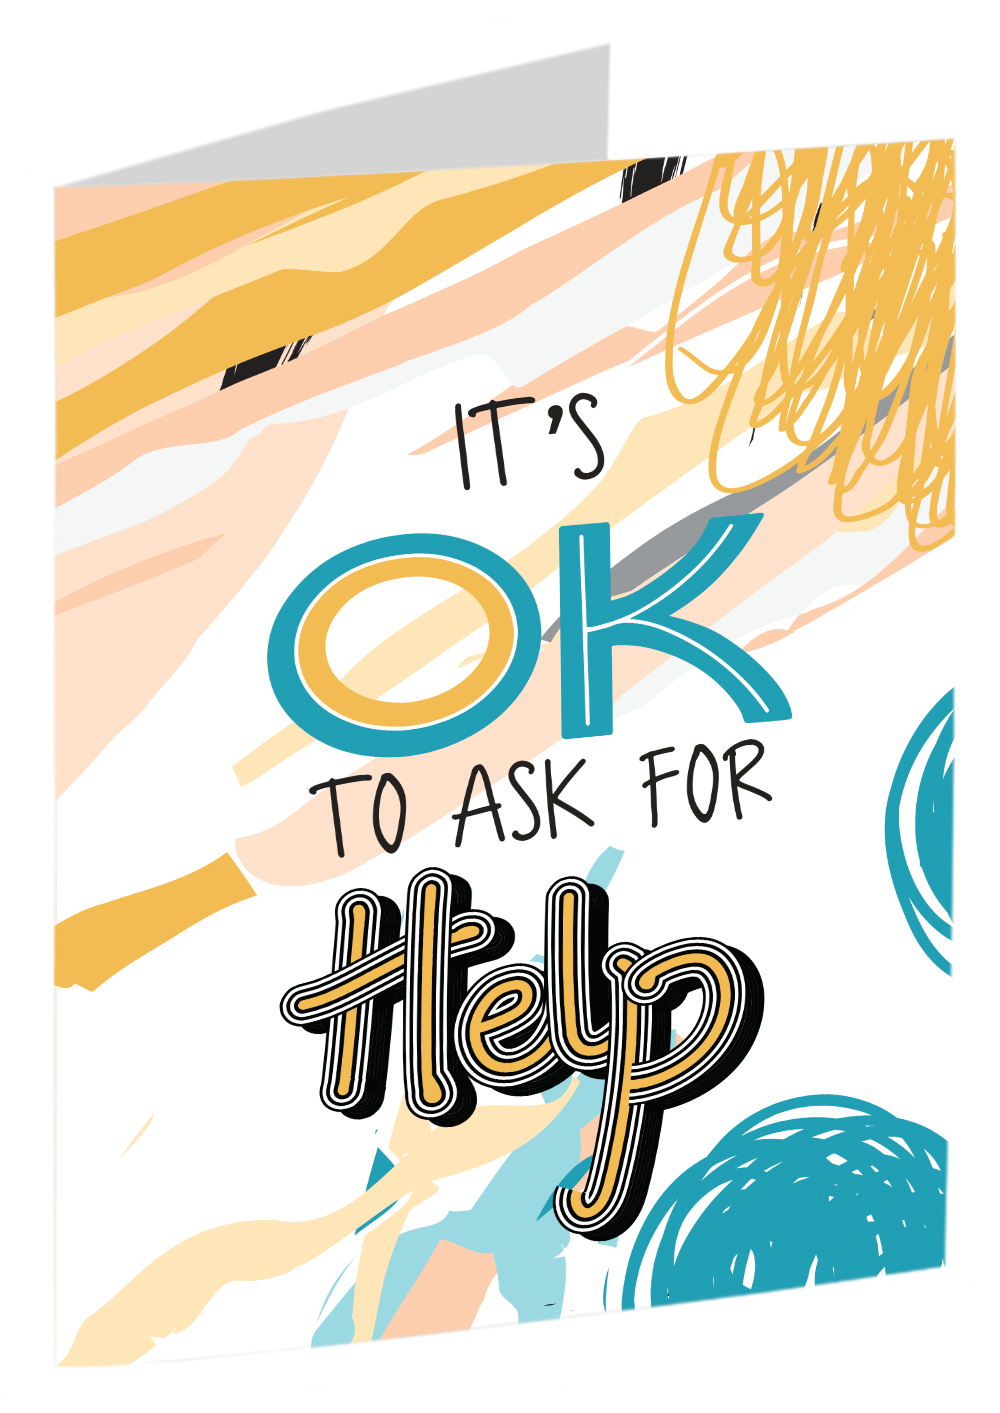 "It's OK To Ask For Help"